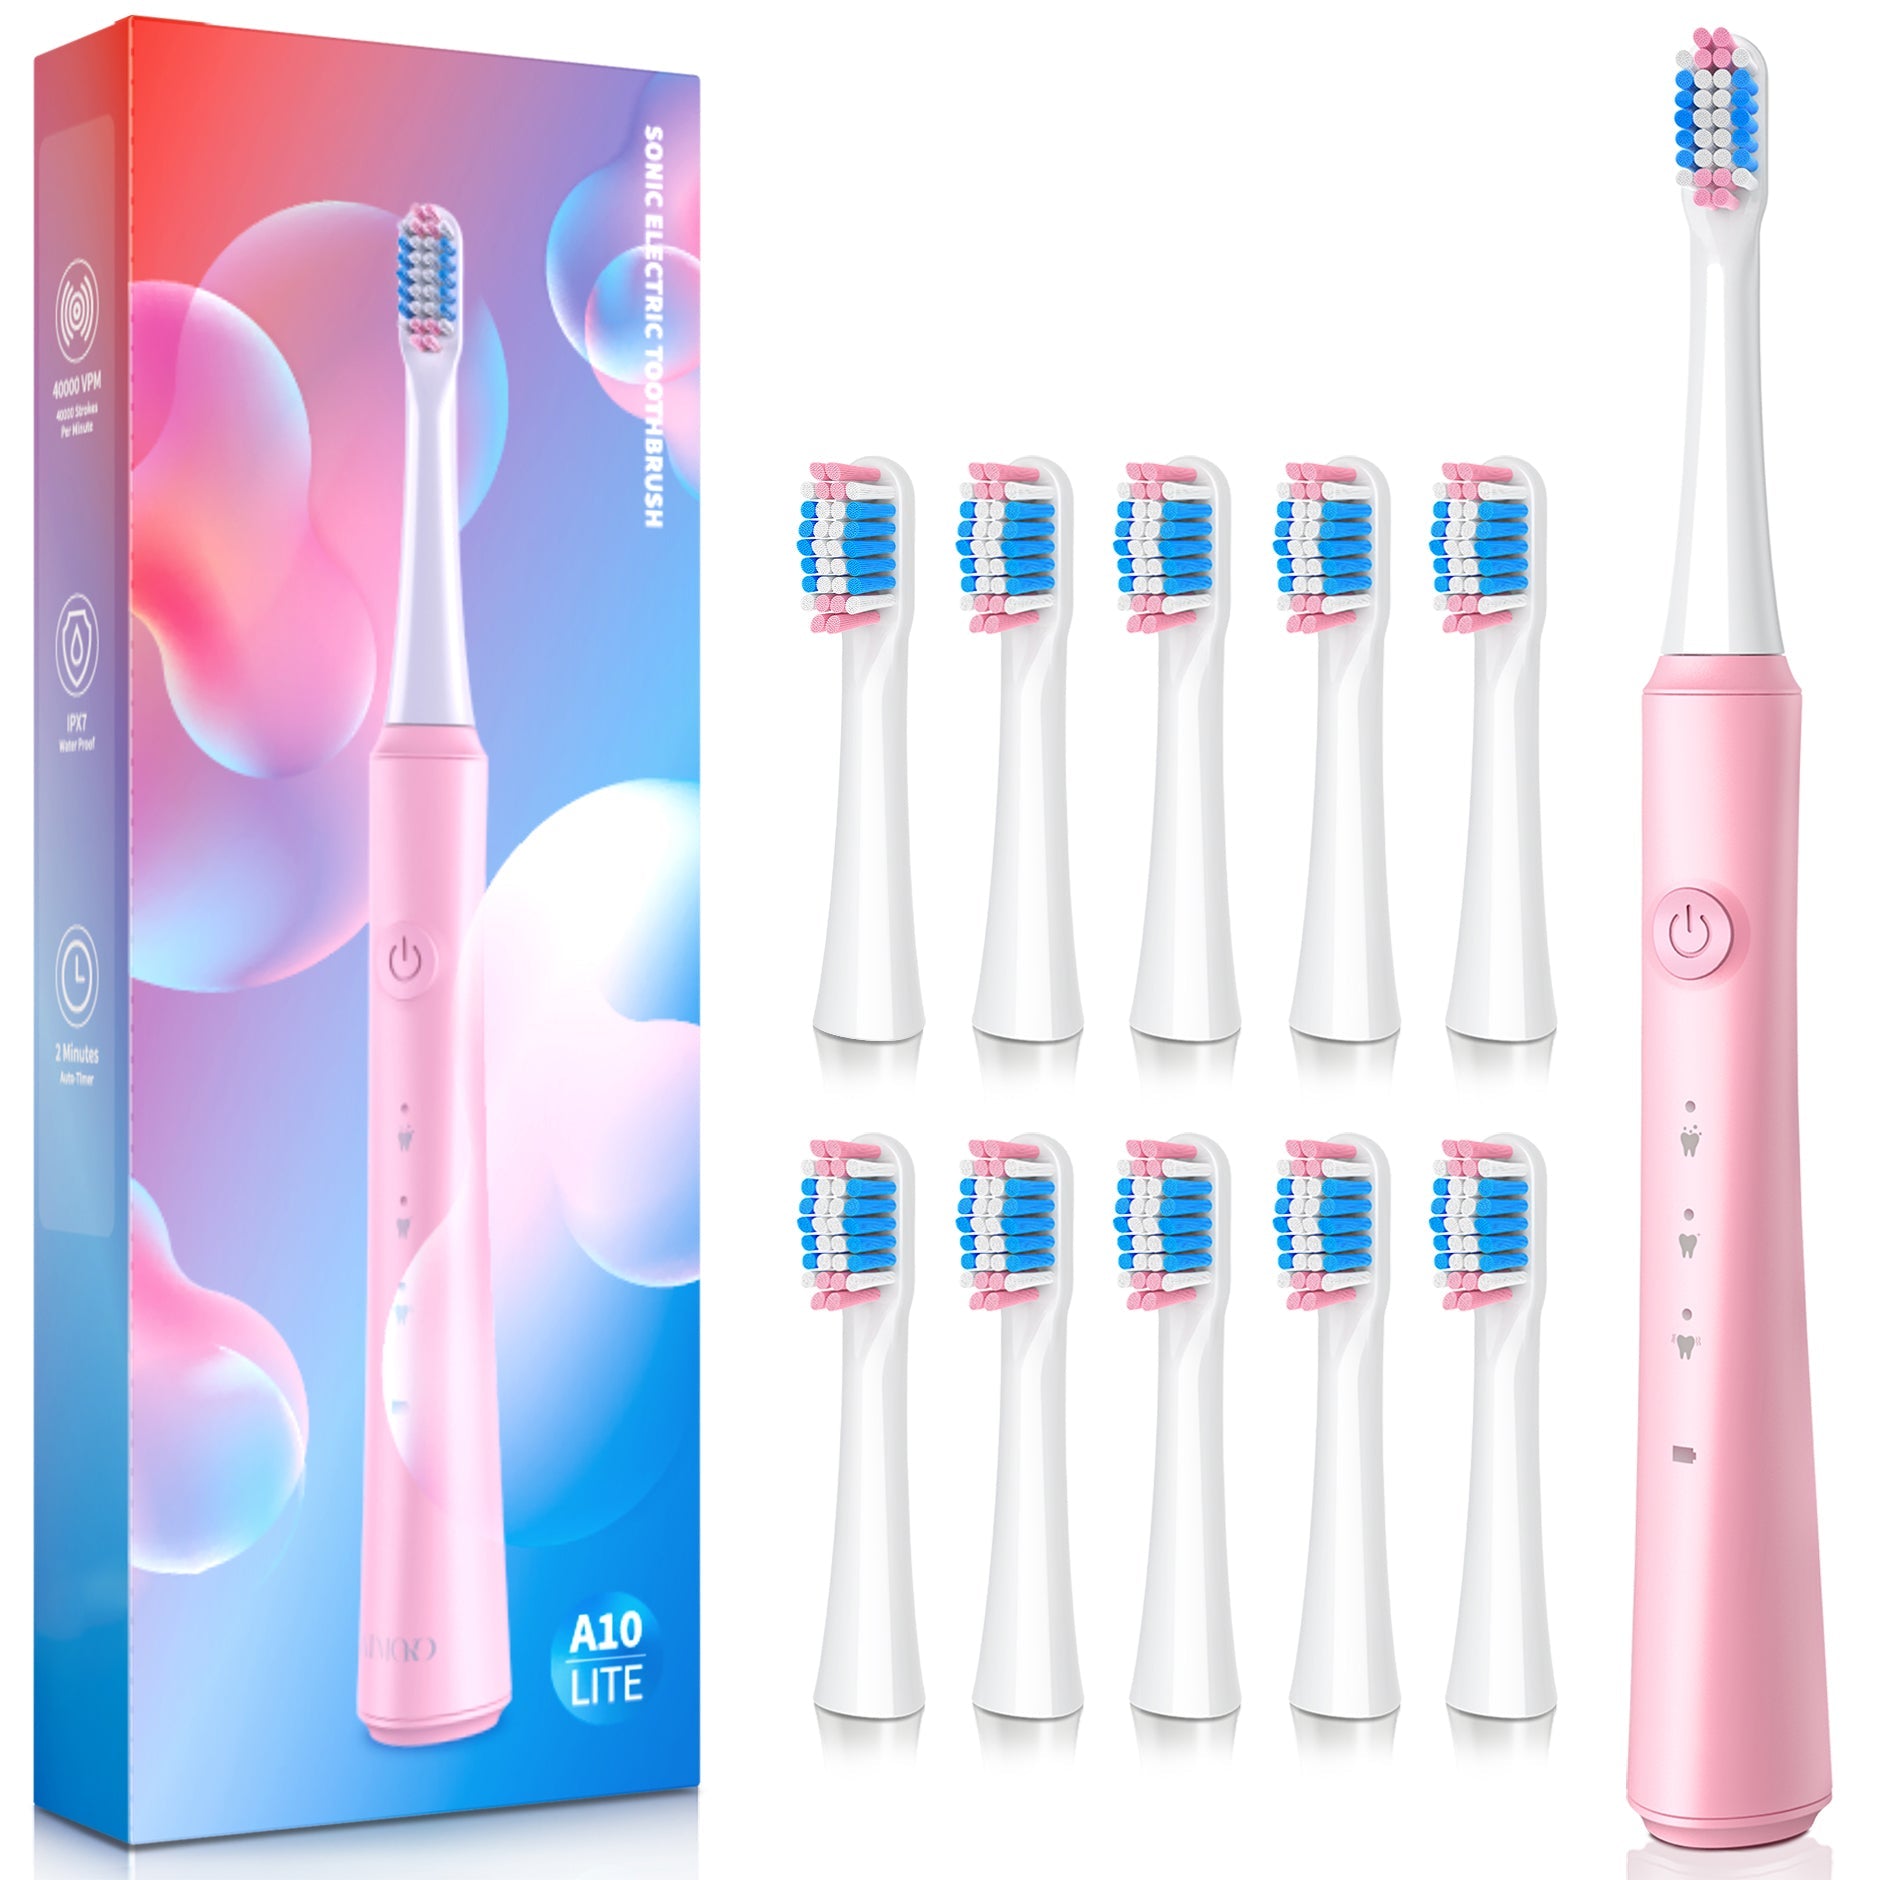 141AP Sonic Electric Toothbrush with 10 Brush Heads